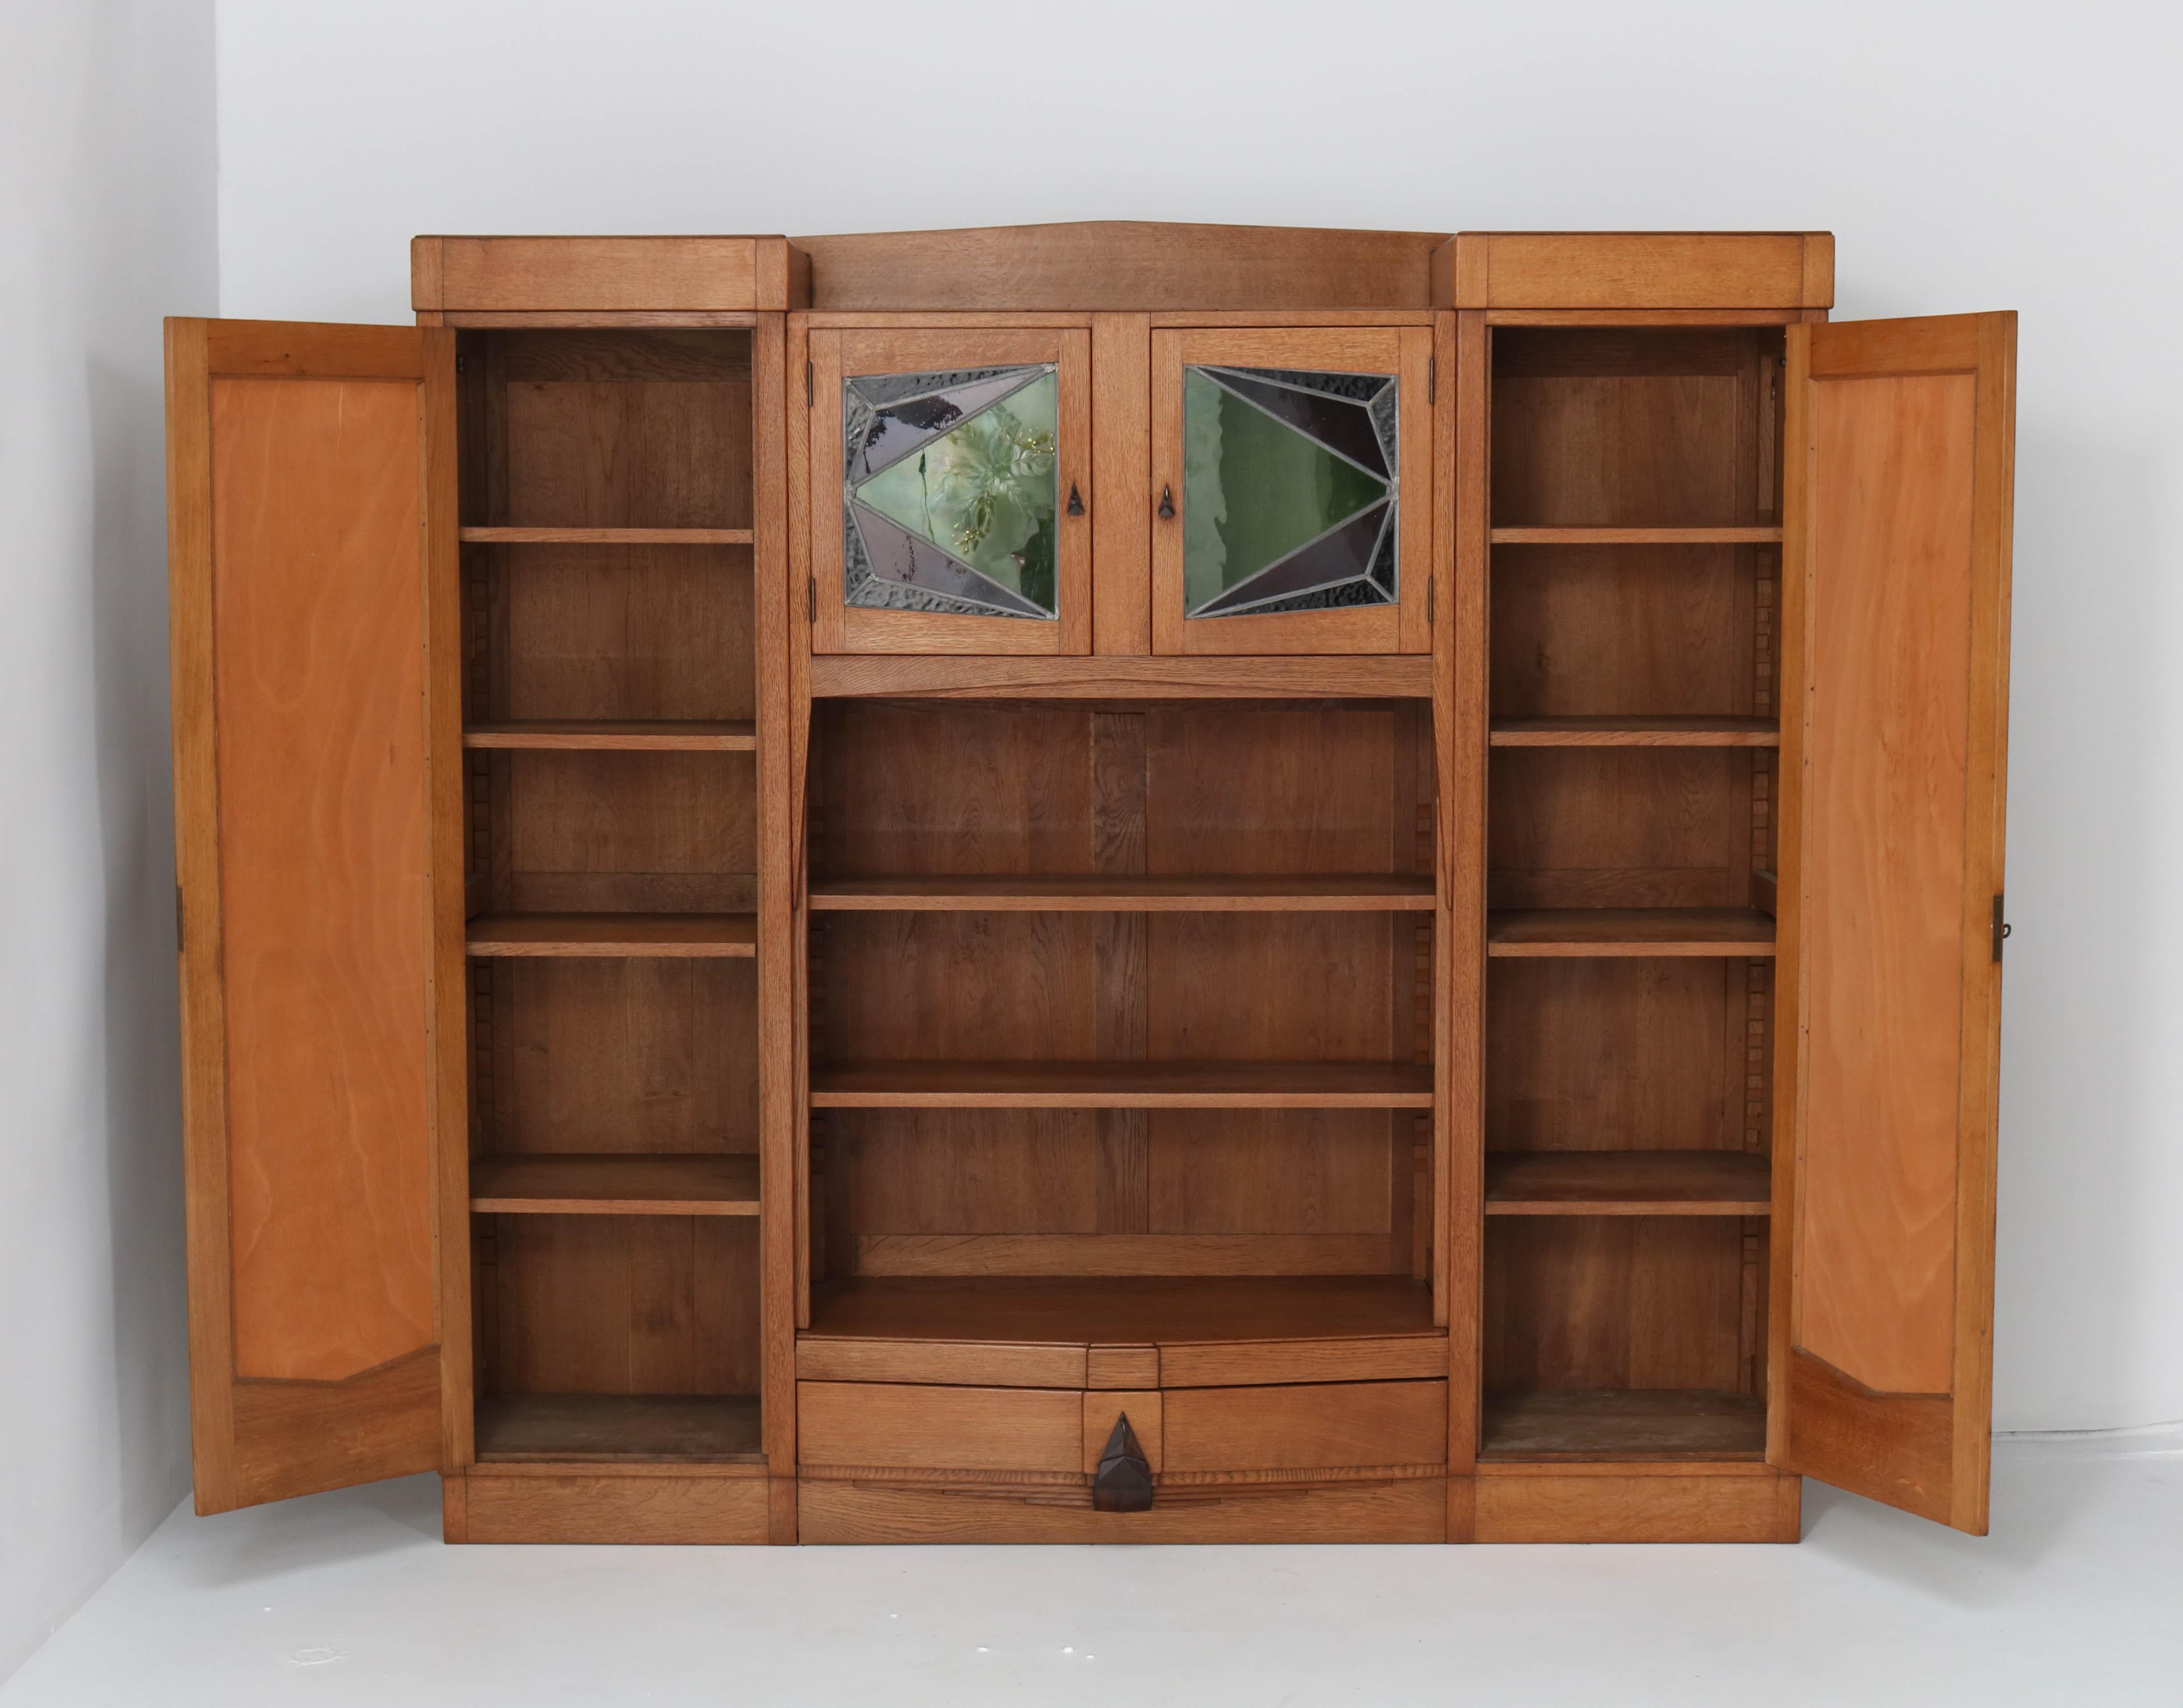 Early 20th Century Oak Art Deco Amsterdam School Bookcase with Stained Glass, 1920s